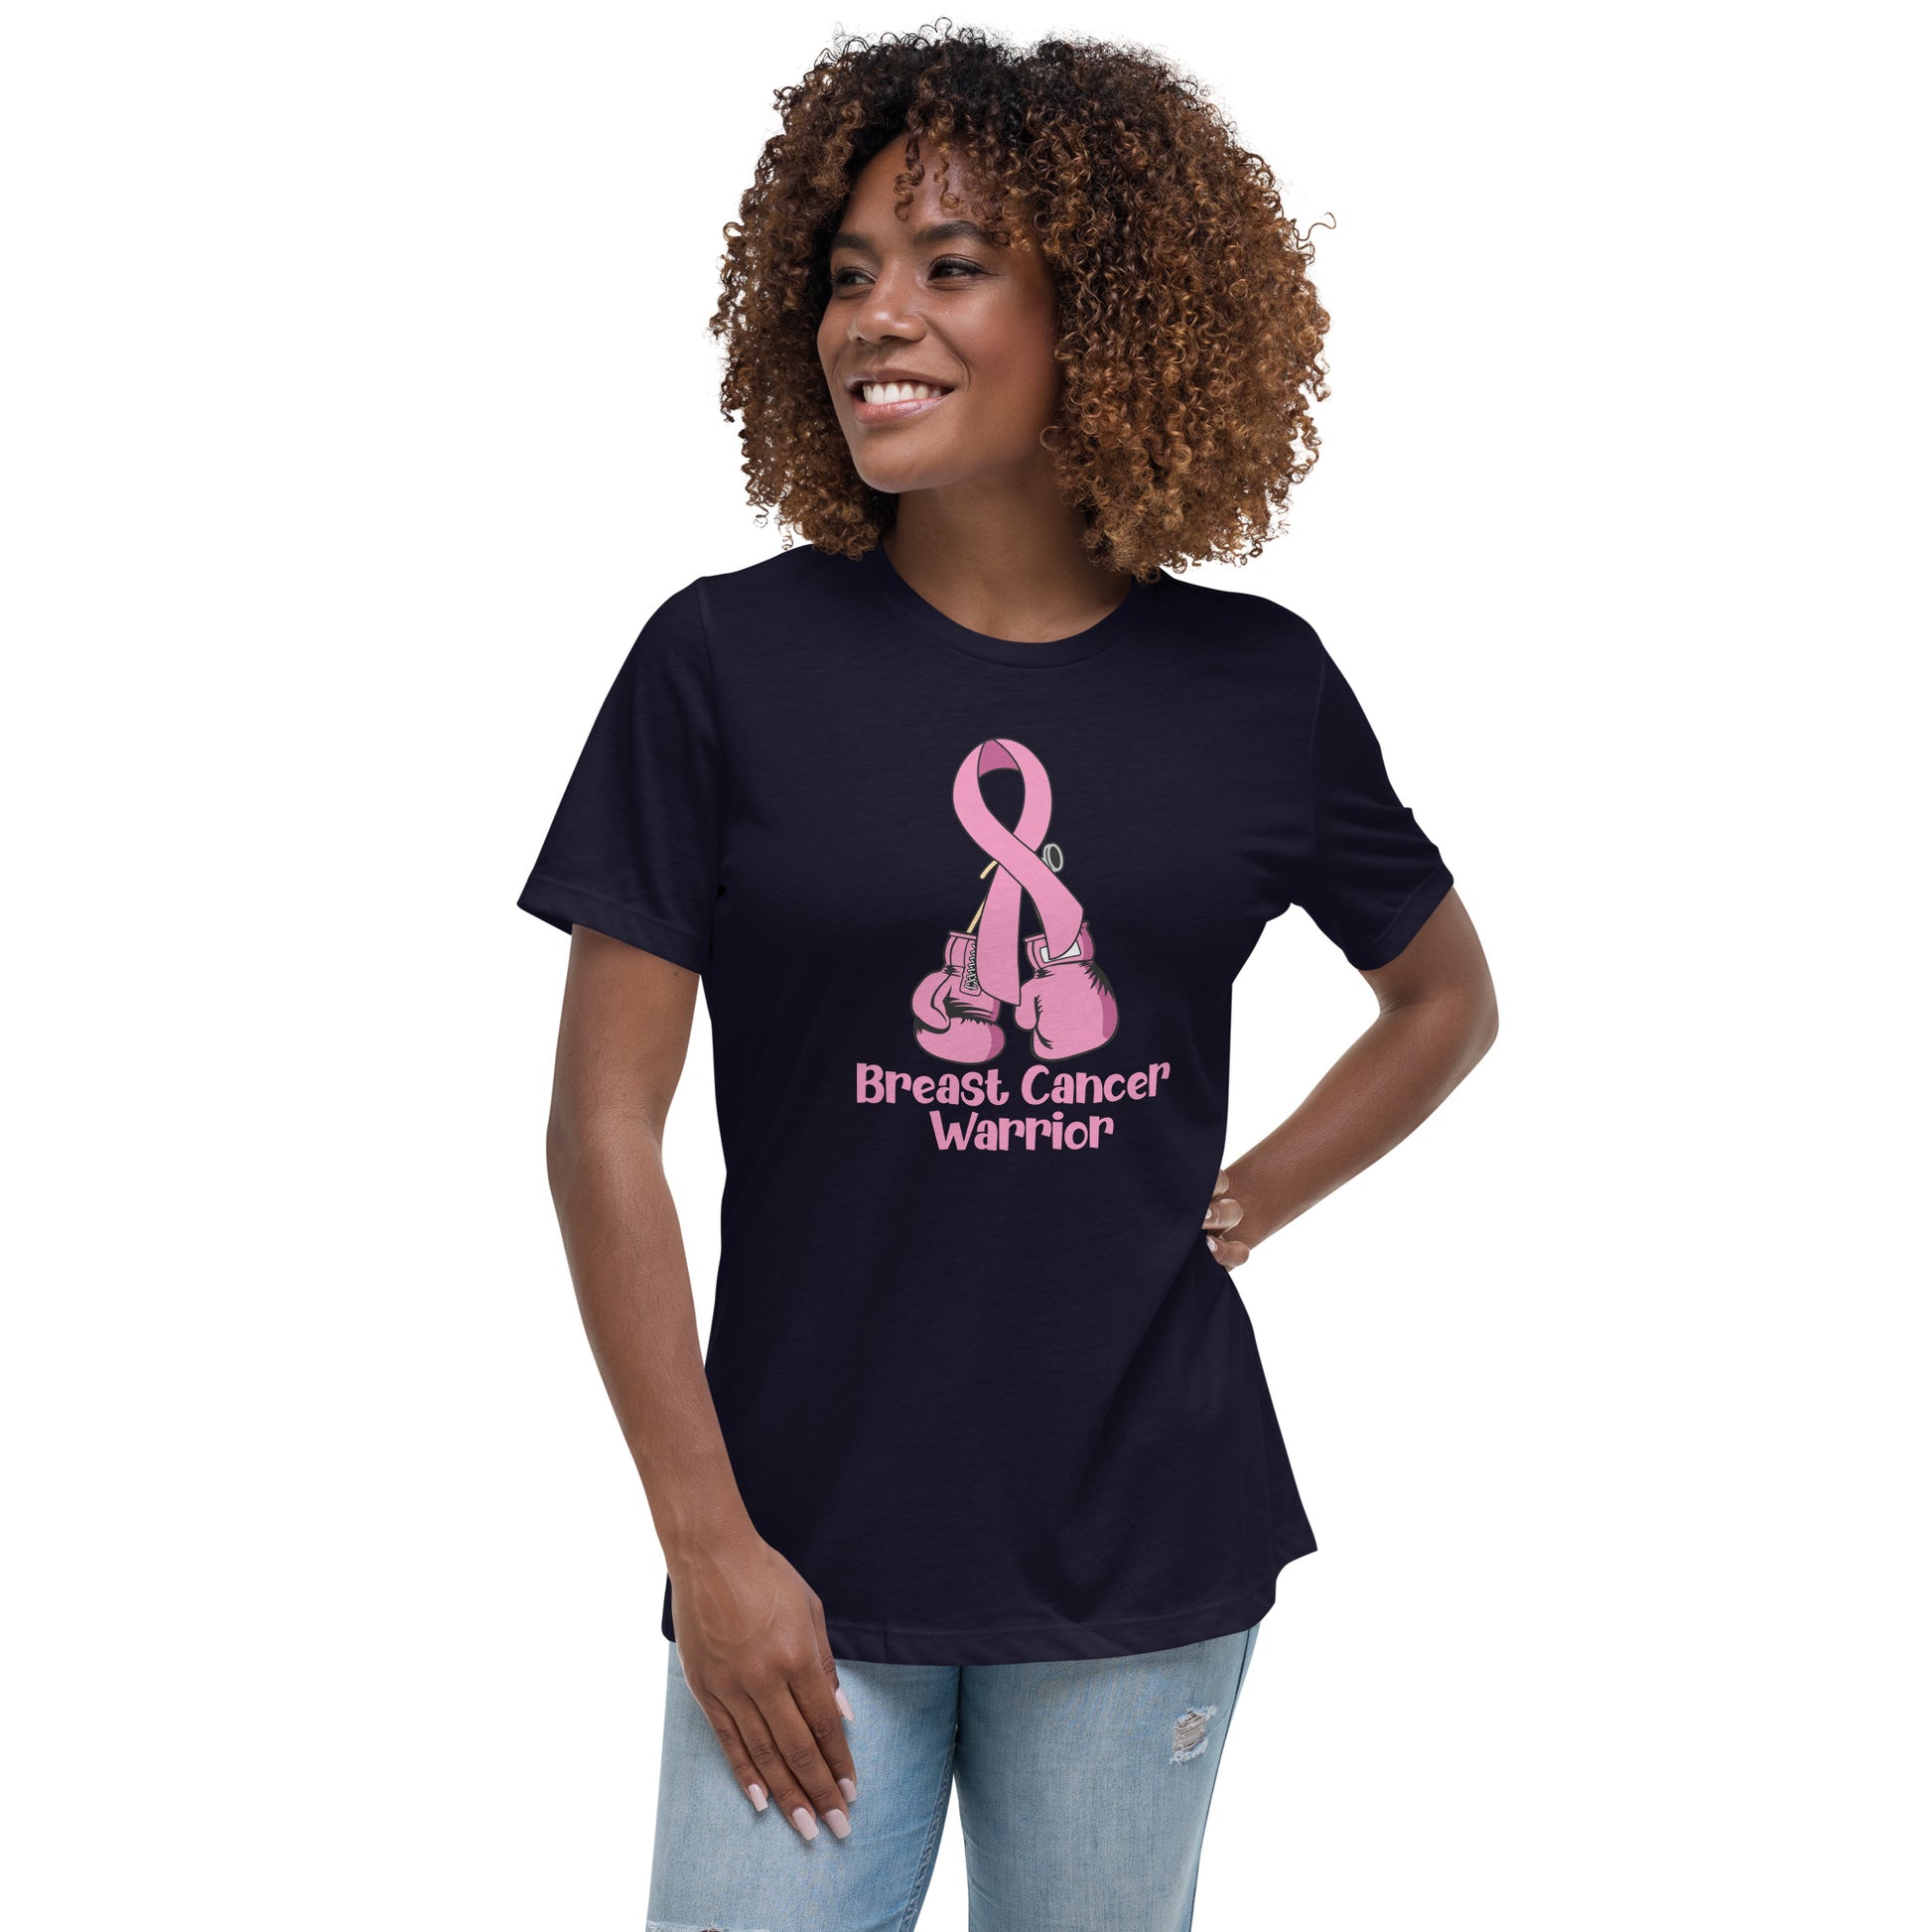 Breast Cancer Warrior Women's Relaxed Tshirt